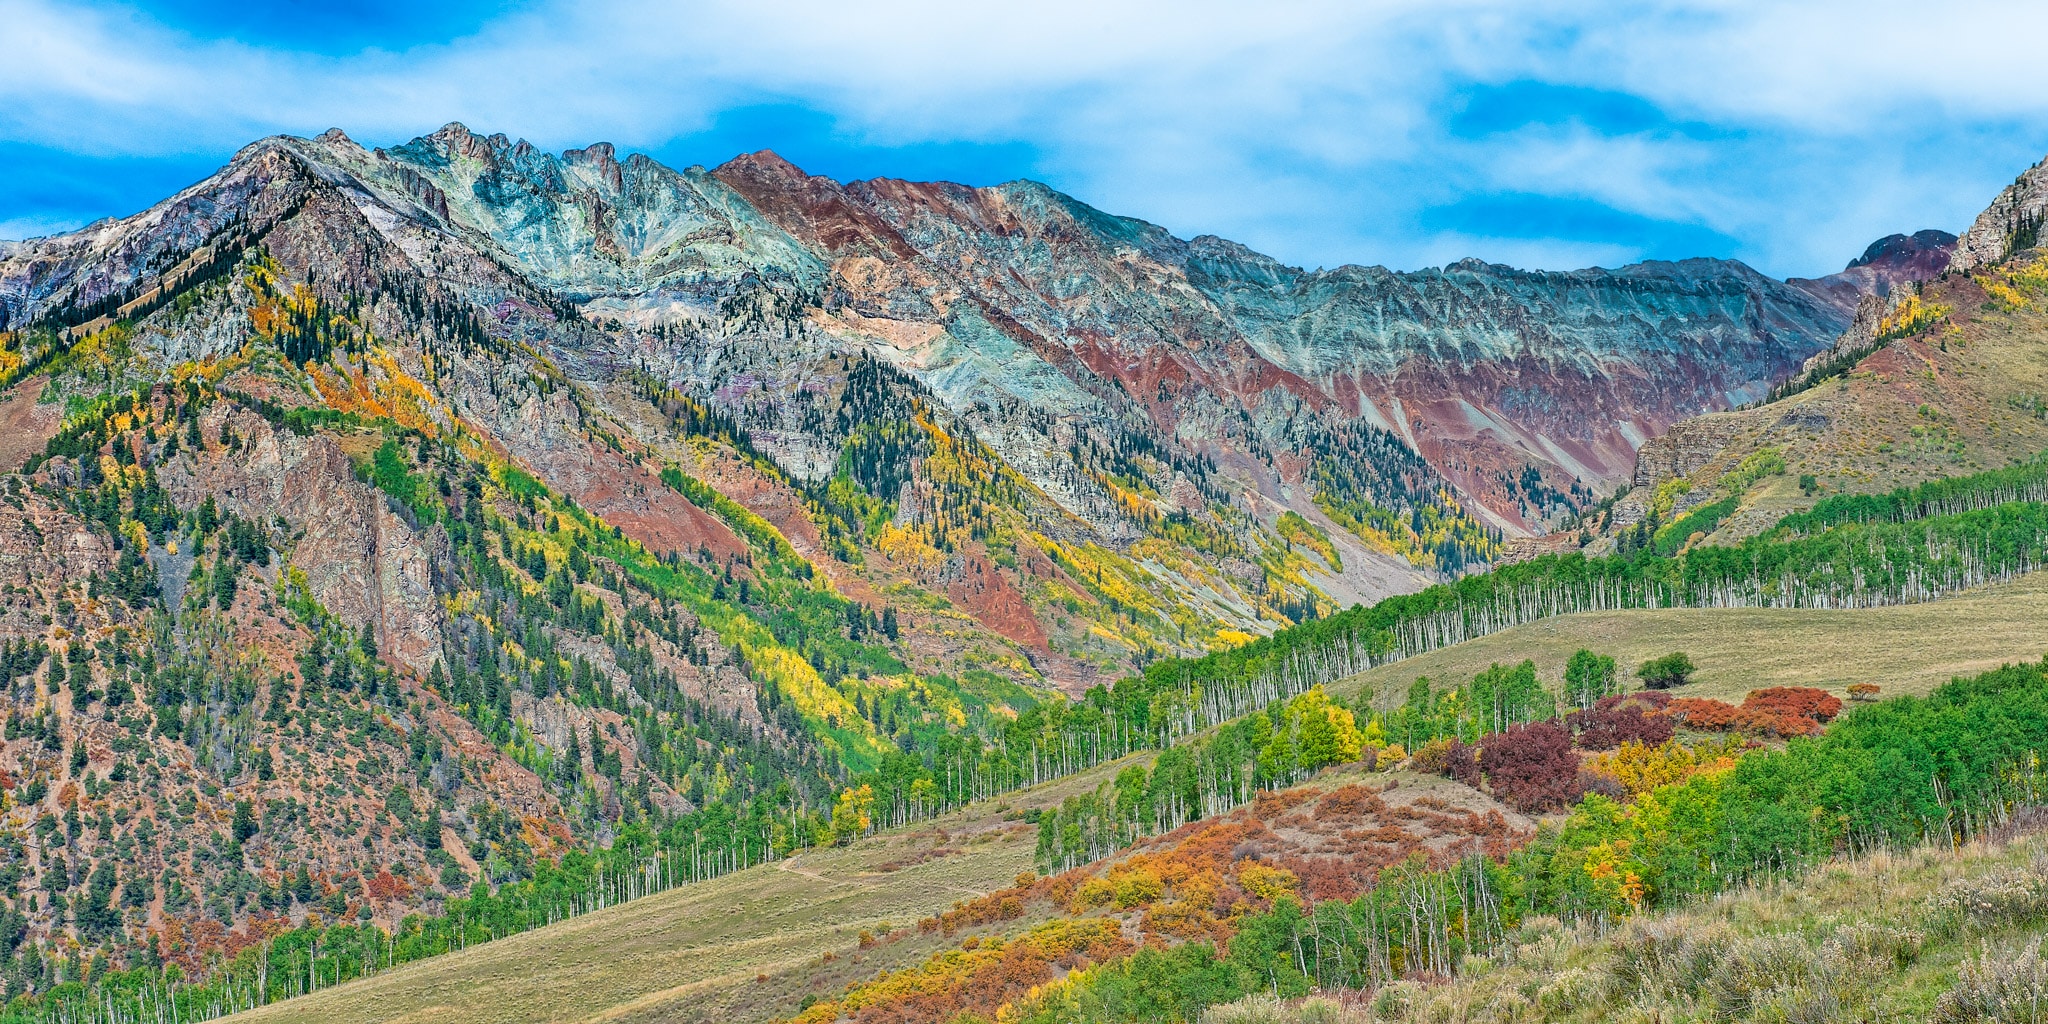 The highly mineralized rocks of the San Juan Mountains contrast with the bright fall colors of the Gambel oaks and aspen trees.